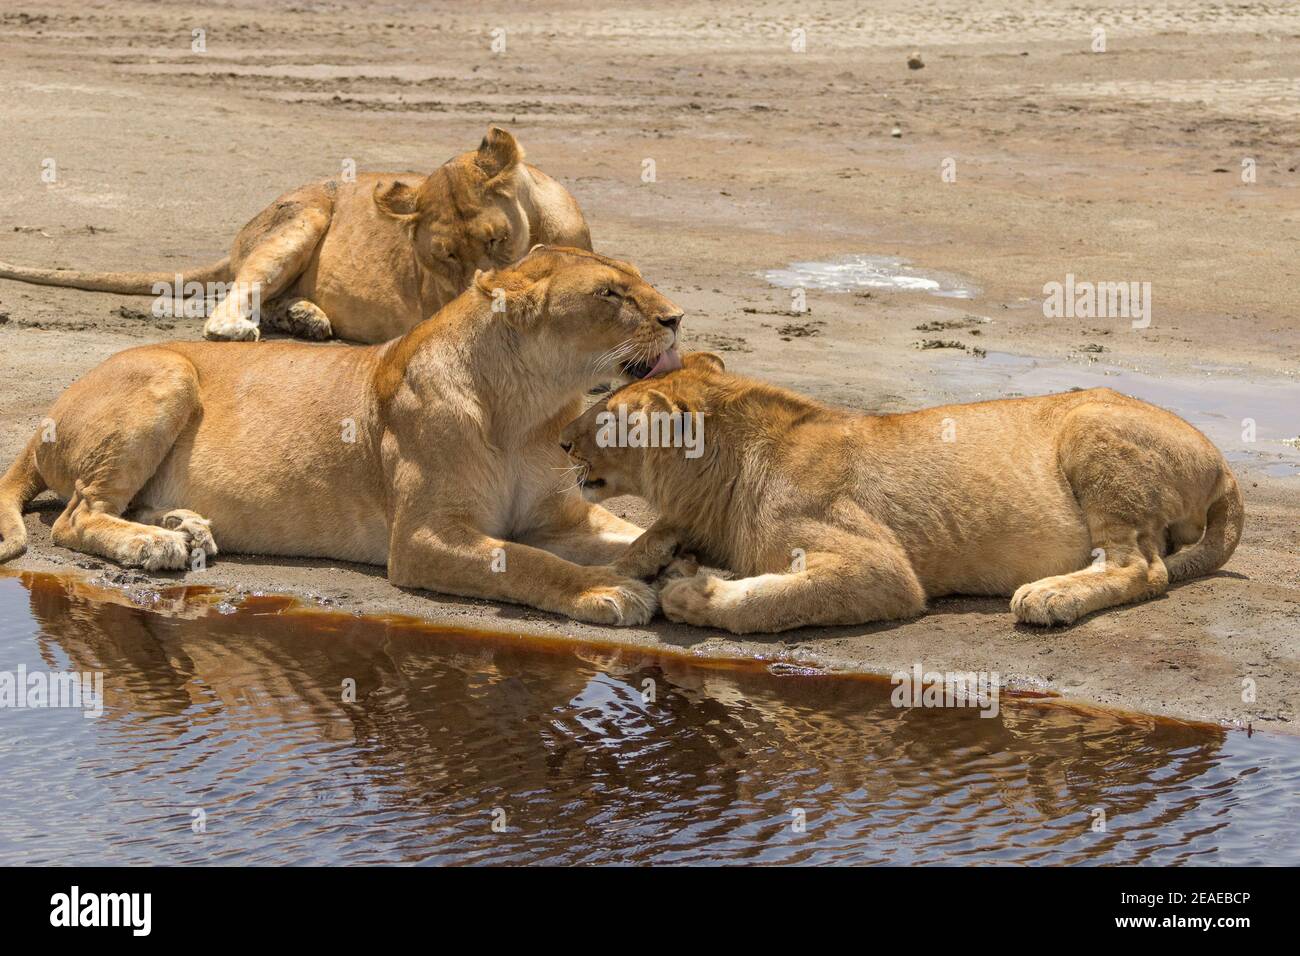 Three lions at the side of a watering hole in the african savanna. Stock Photo